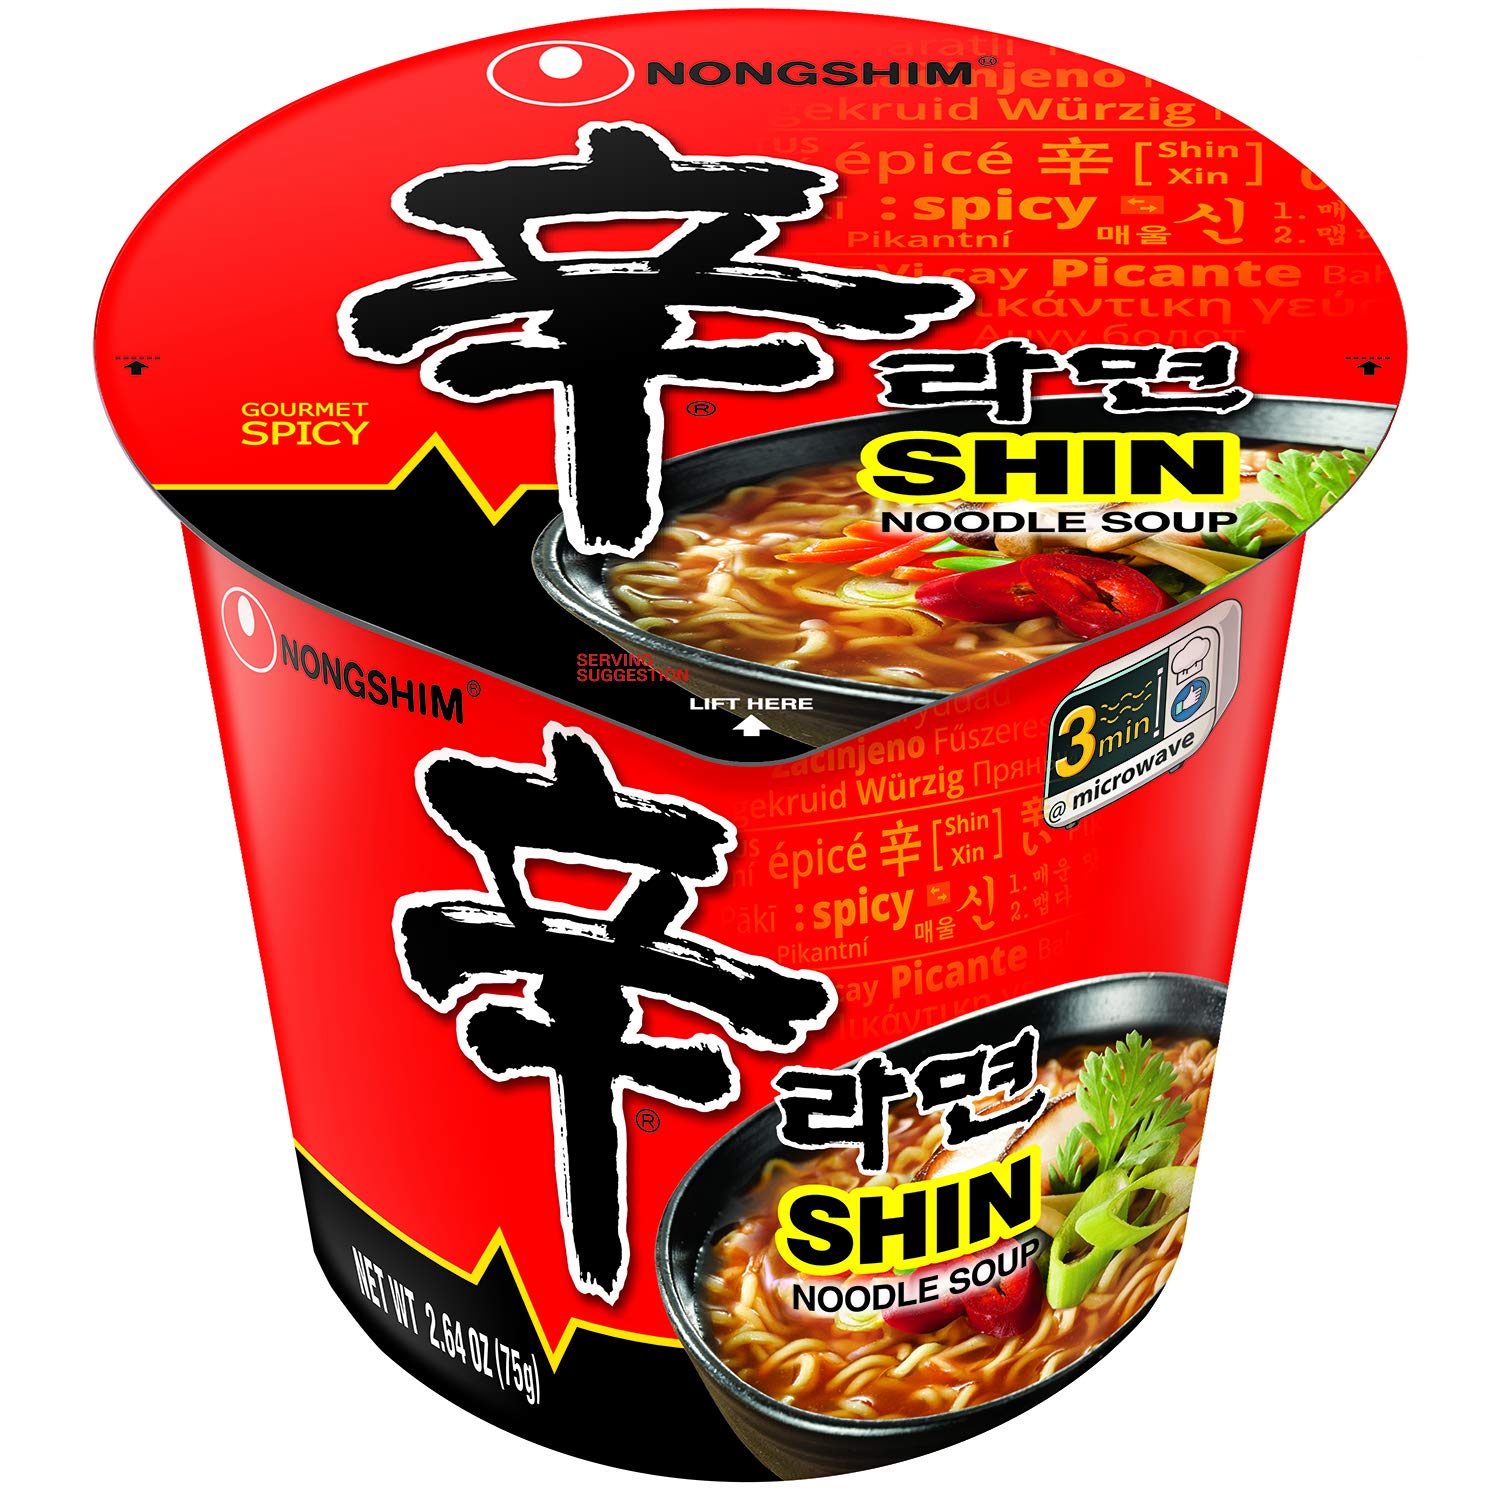 6-Pack 2.64-Oz Nongshim Shin Cup Noodle Soup (Gourmet Spicy) $5.01 w/ S&S + Free Shipping w/ Prime or on $25+